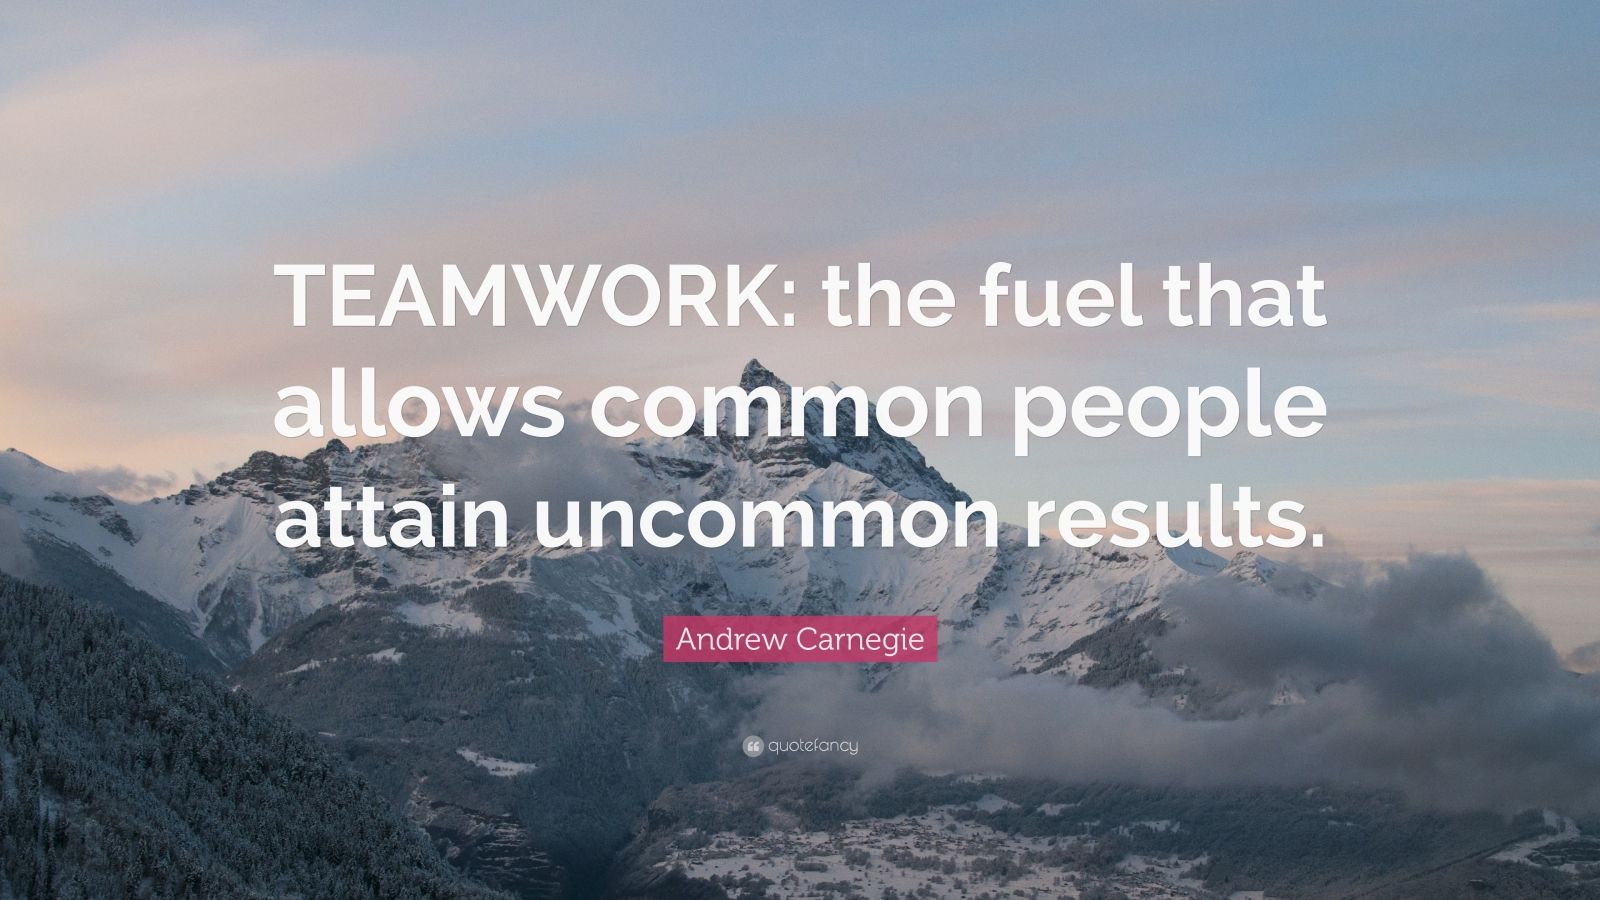 Andrew Carnegie Quote: “TEAMWORK: the fuel that allows common people ...